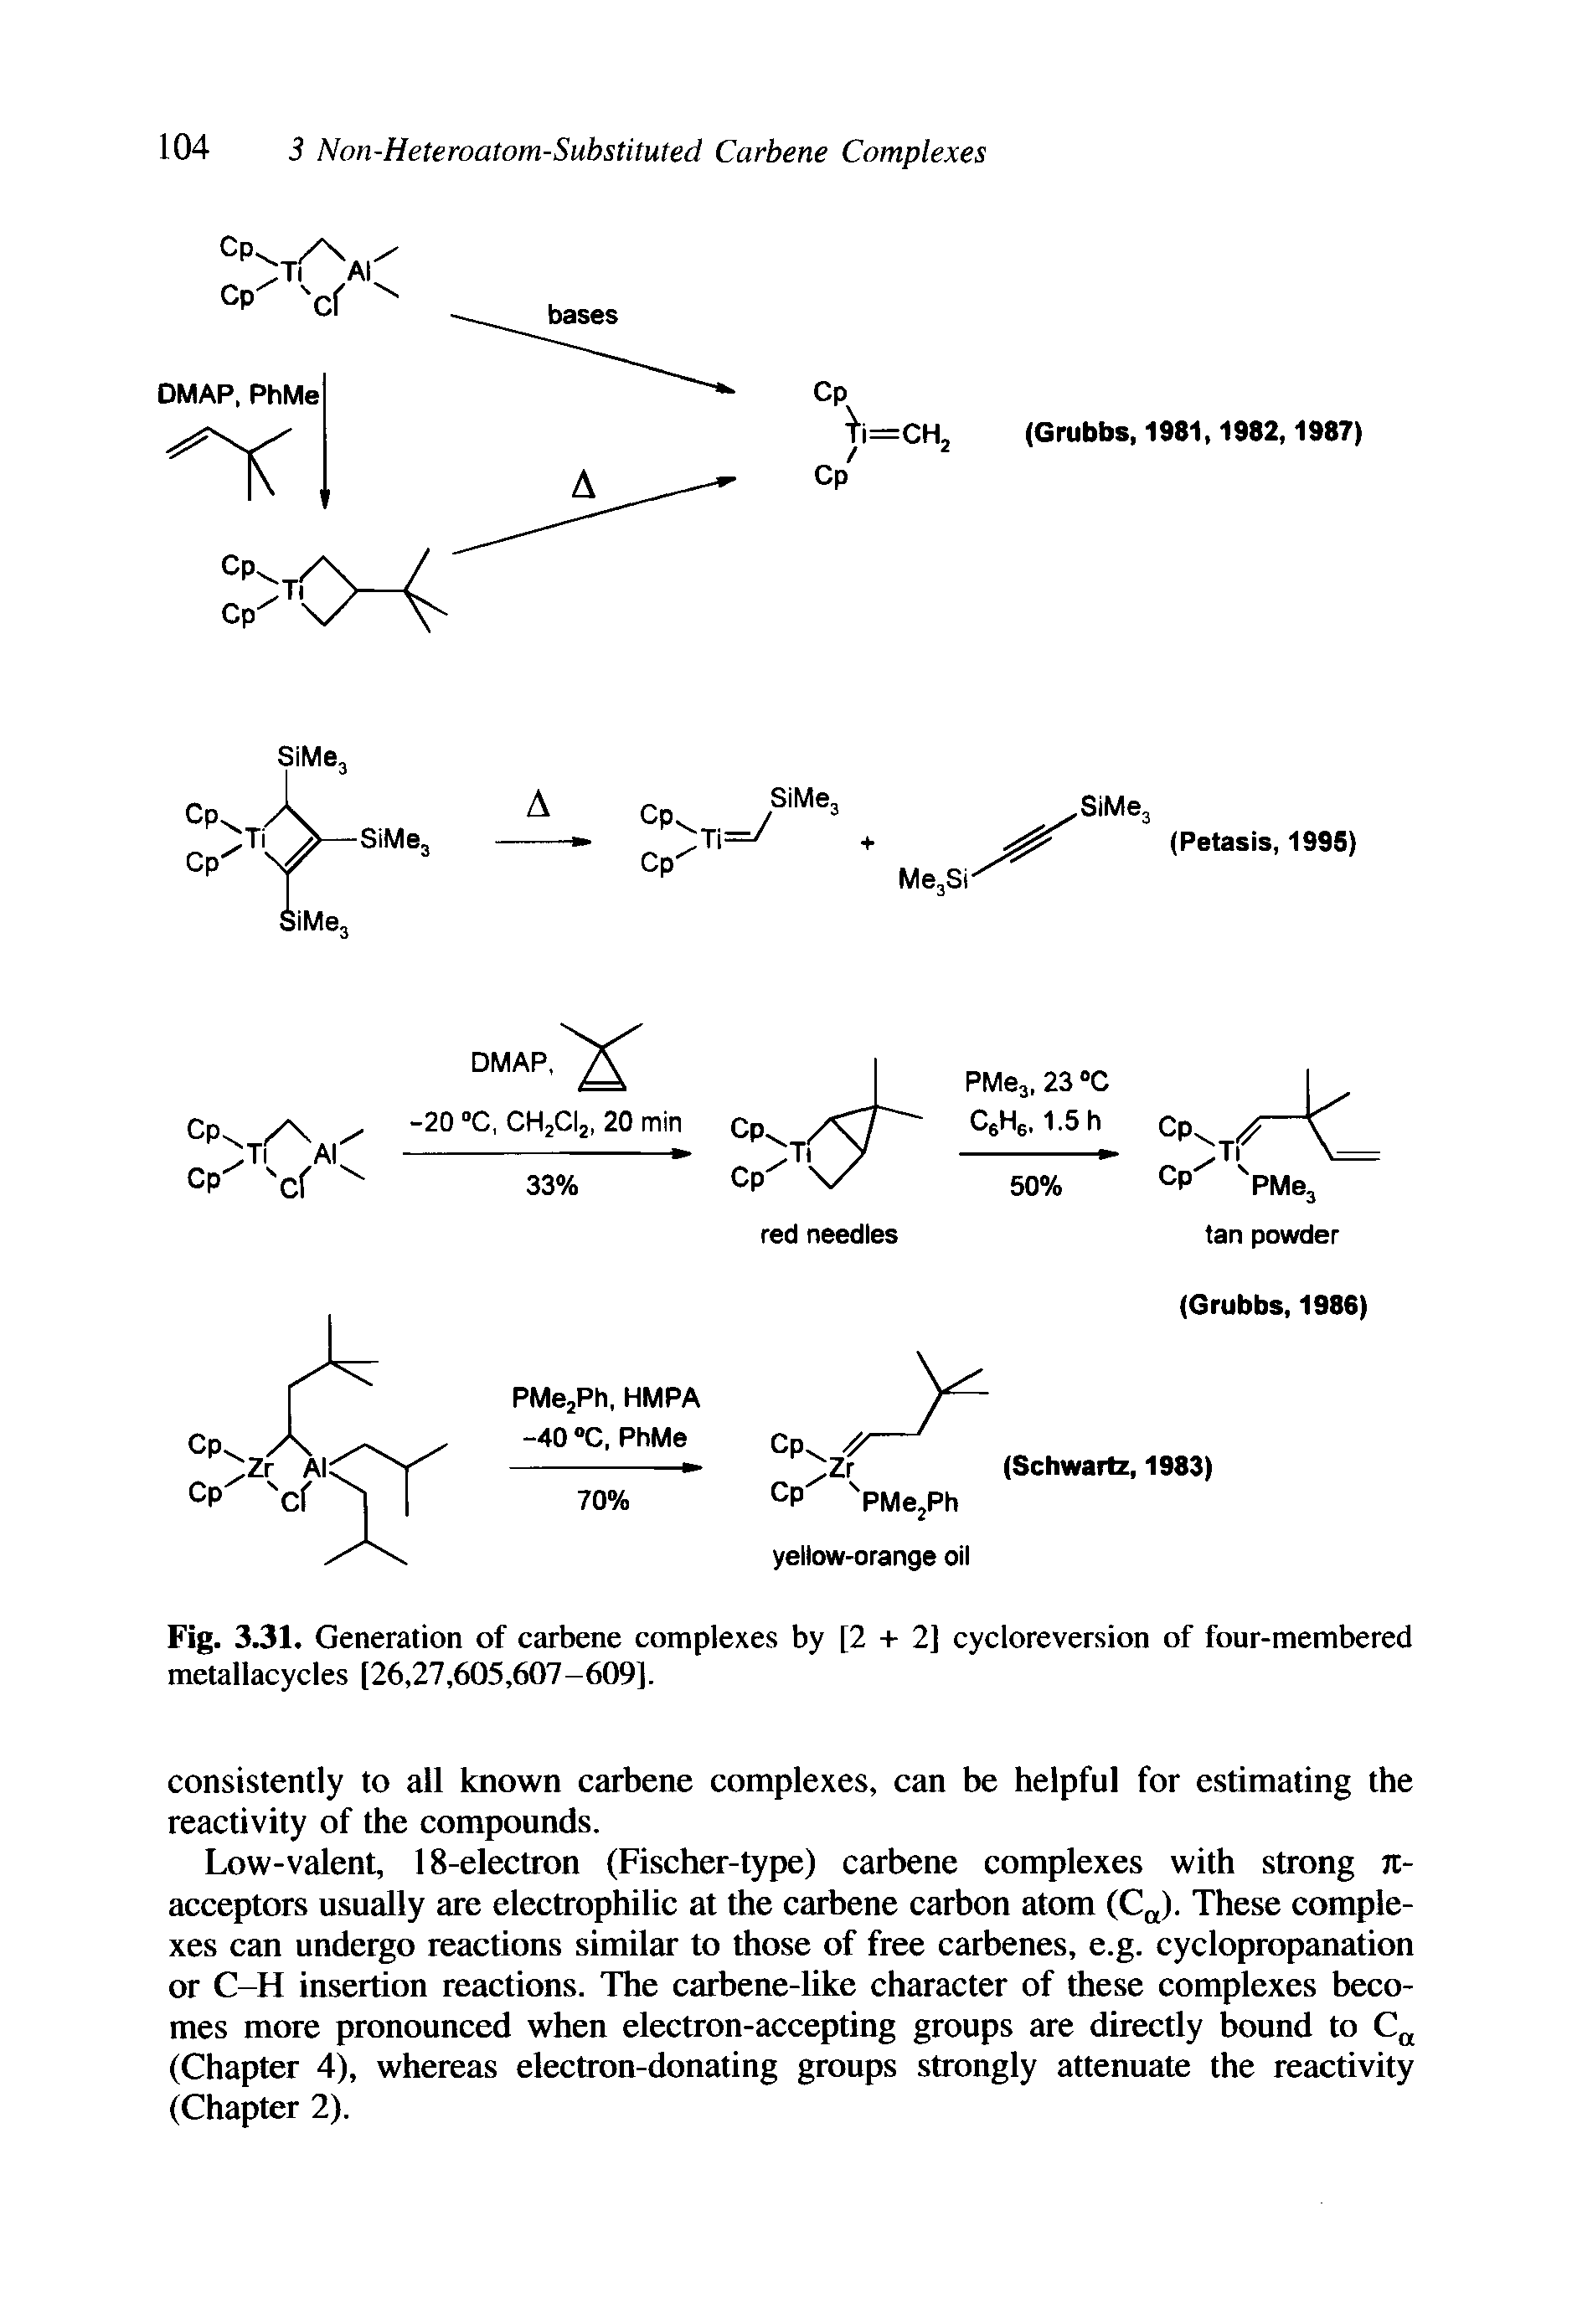 Fig. 3.31. Generation of carbene complexes by [2 -i- 2] cycloreversion of four-membered metallacycles [26,27,605,607-609].